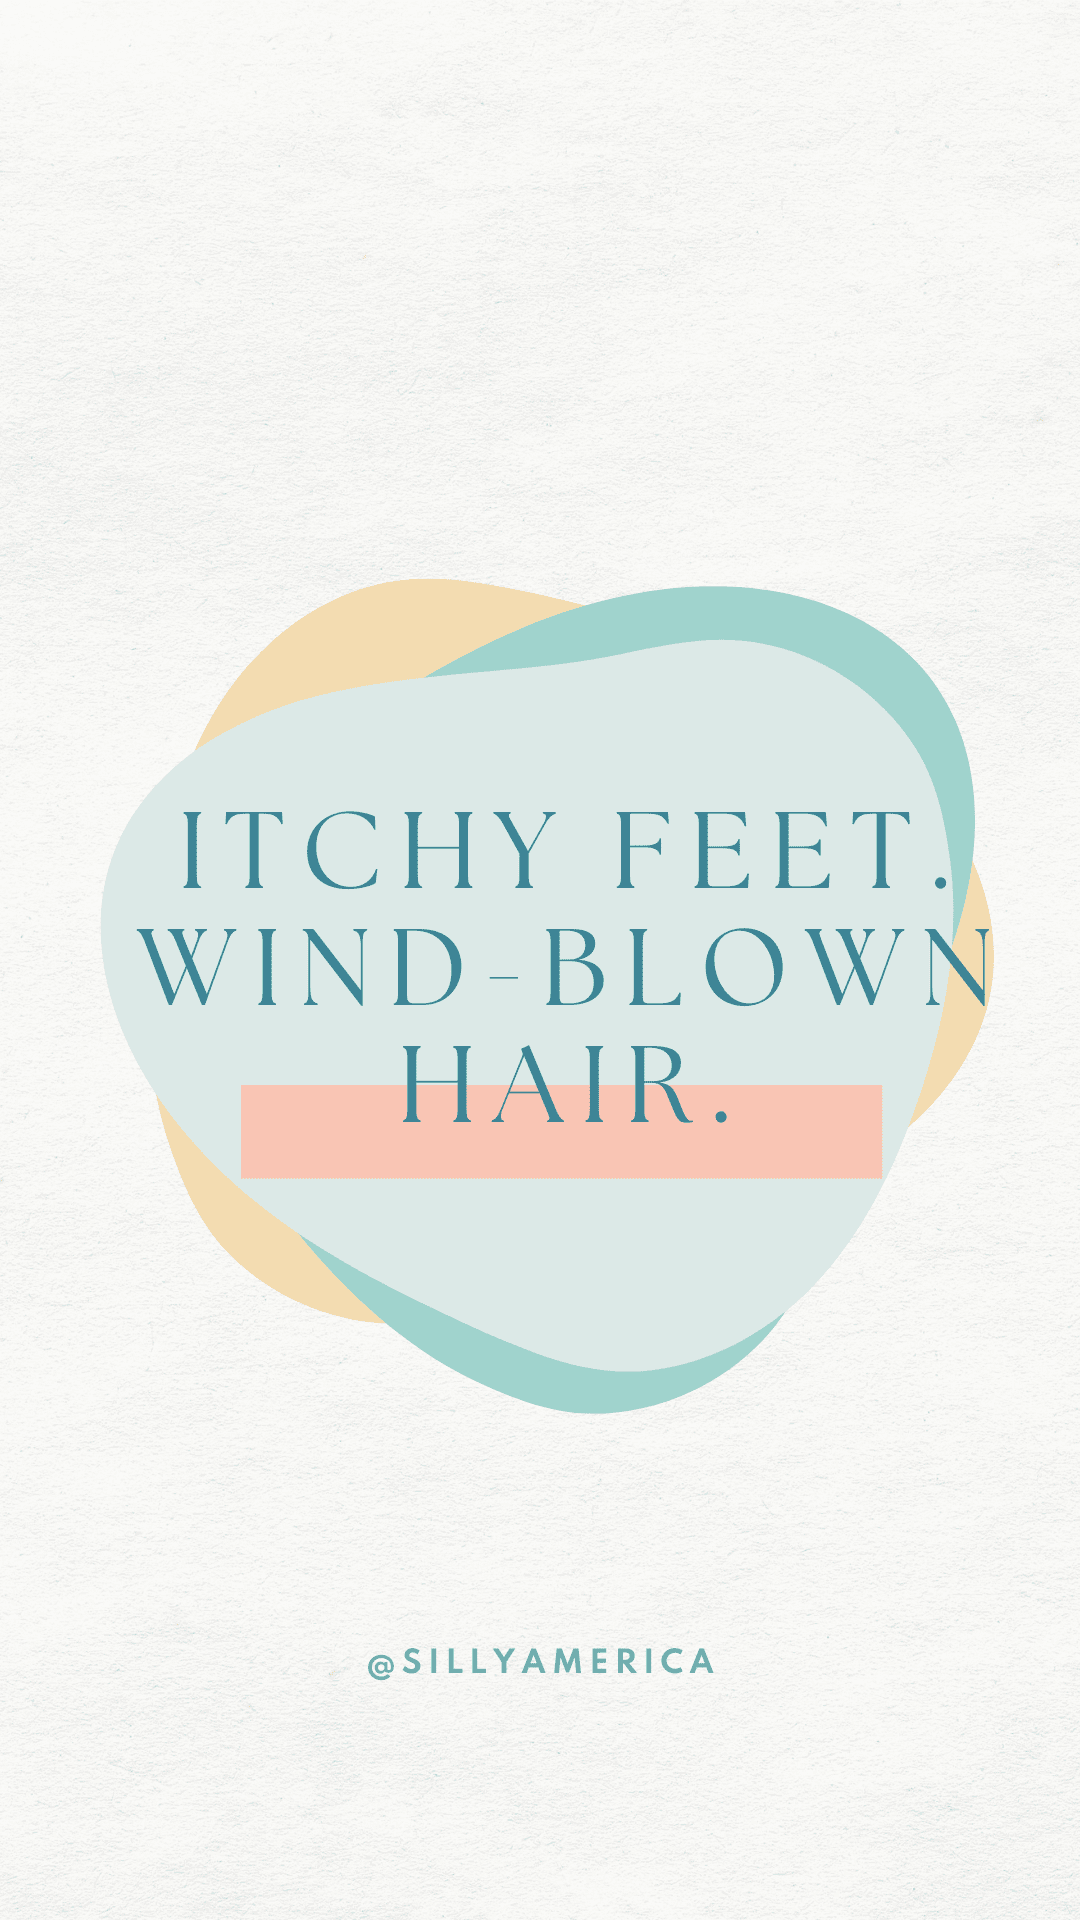 Itchy feet. Wind-blown hair. - Road Trip Captions for Instagram